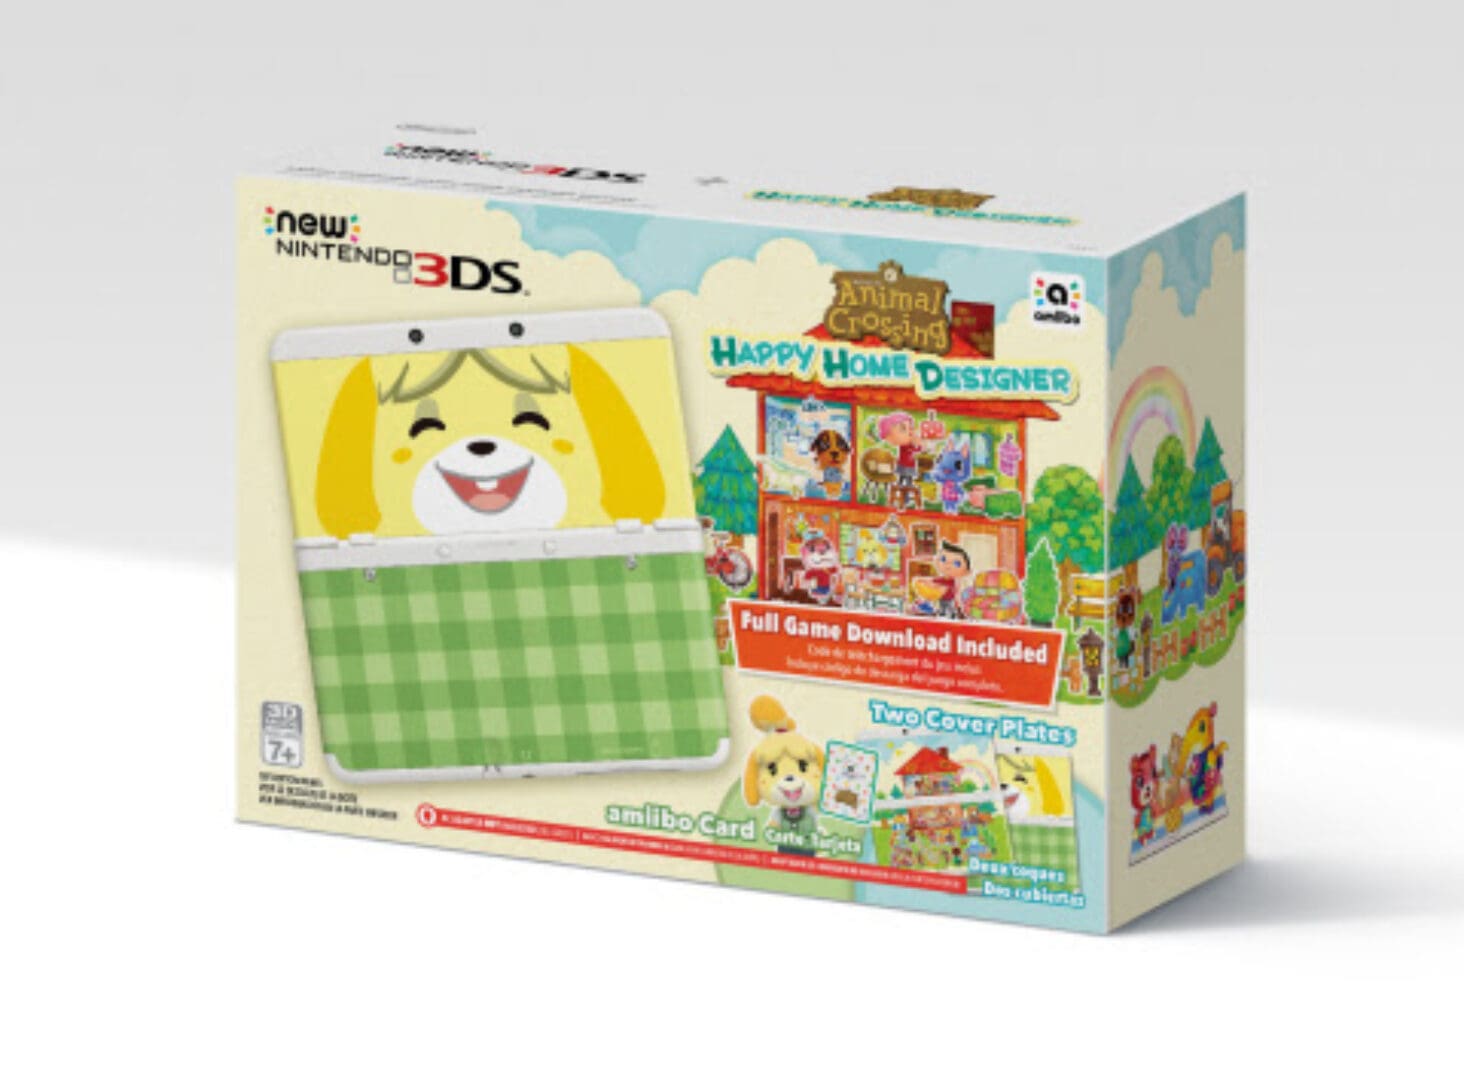 The non-XL New Nintendo 3DS has a North American Release Date